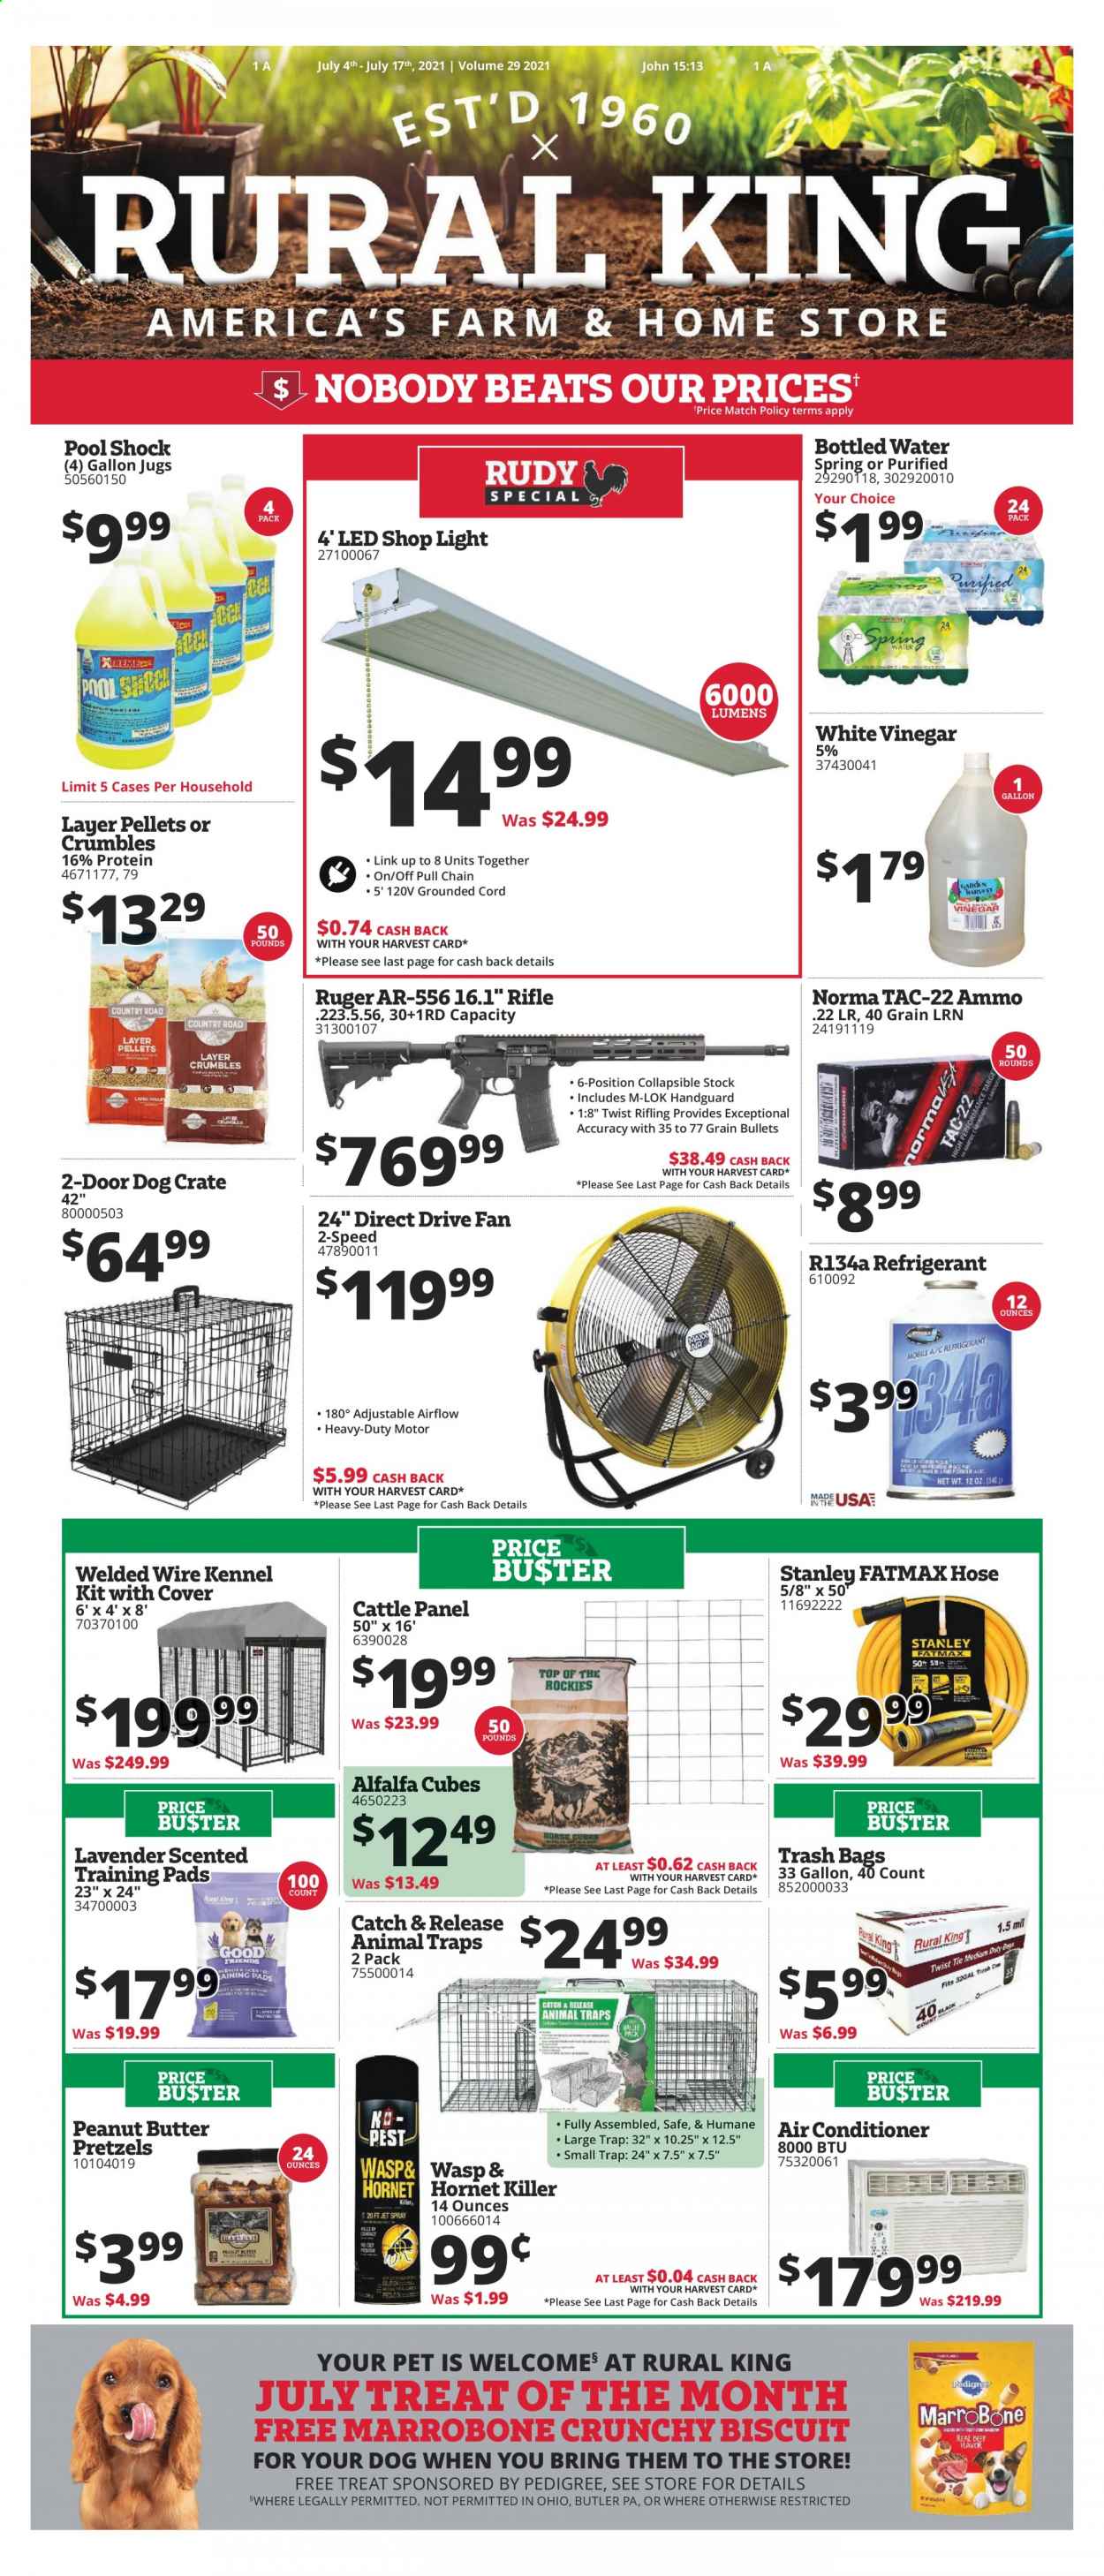 thumbnail - Rural King Flyer - 07/04/2021 - 07/17/2021 - Sales products - pretzels, biscuit, vinegar, peanut butter, bottled water, trash bags, gallon, crate, travel dog kennel, training pads, Pedigree, air conditioner, bag, rifle, Ruger, Stanley, shop light, pool. Page 1.